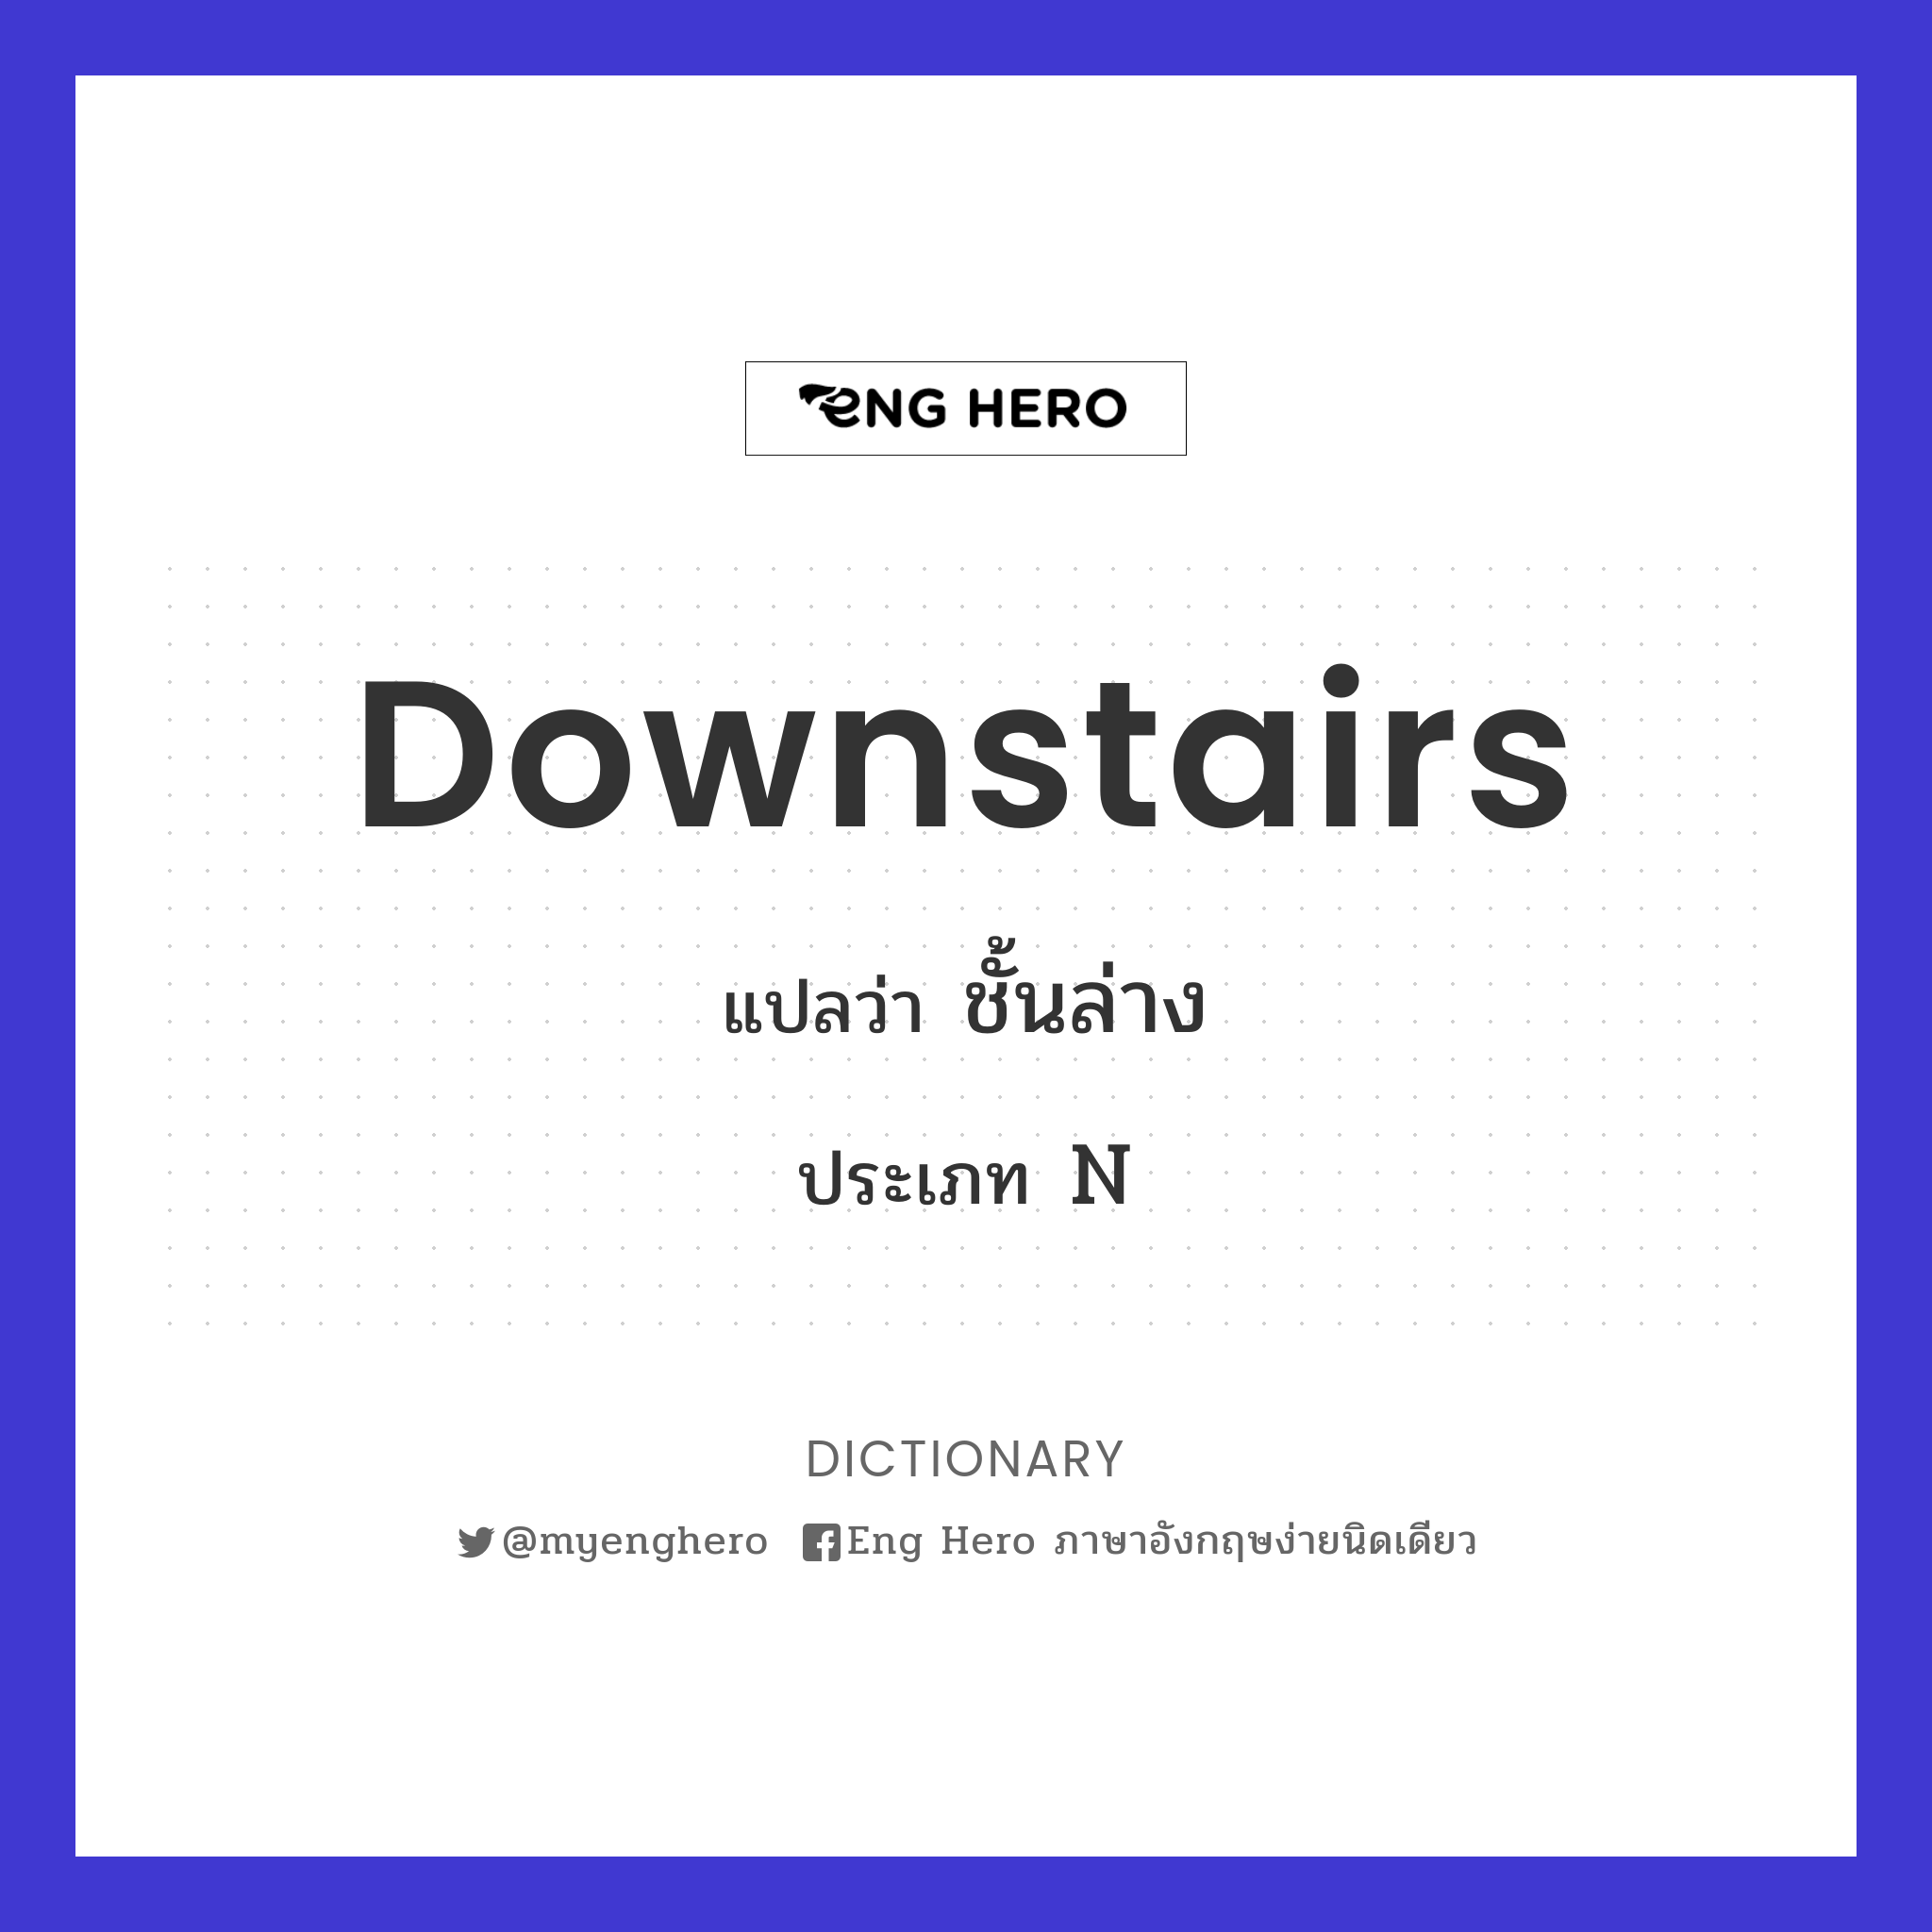 downstairs